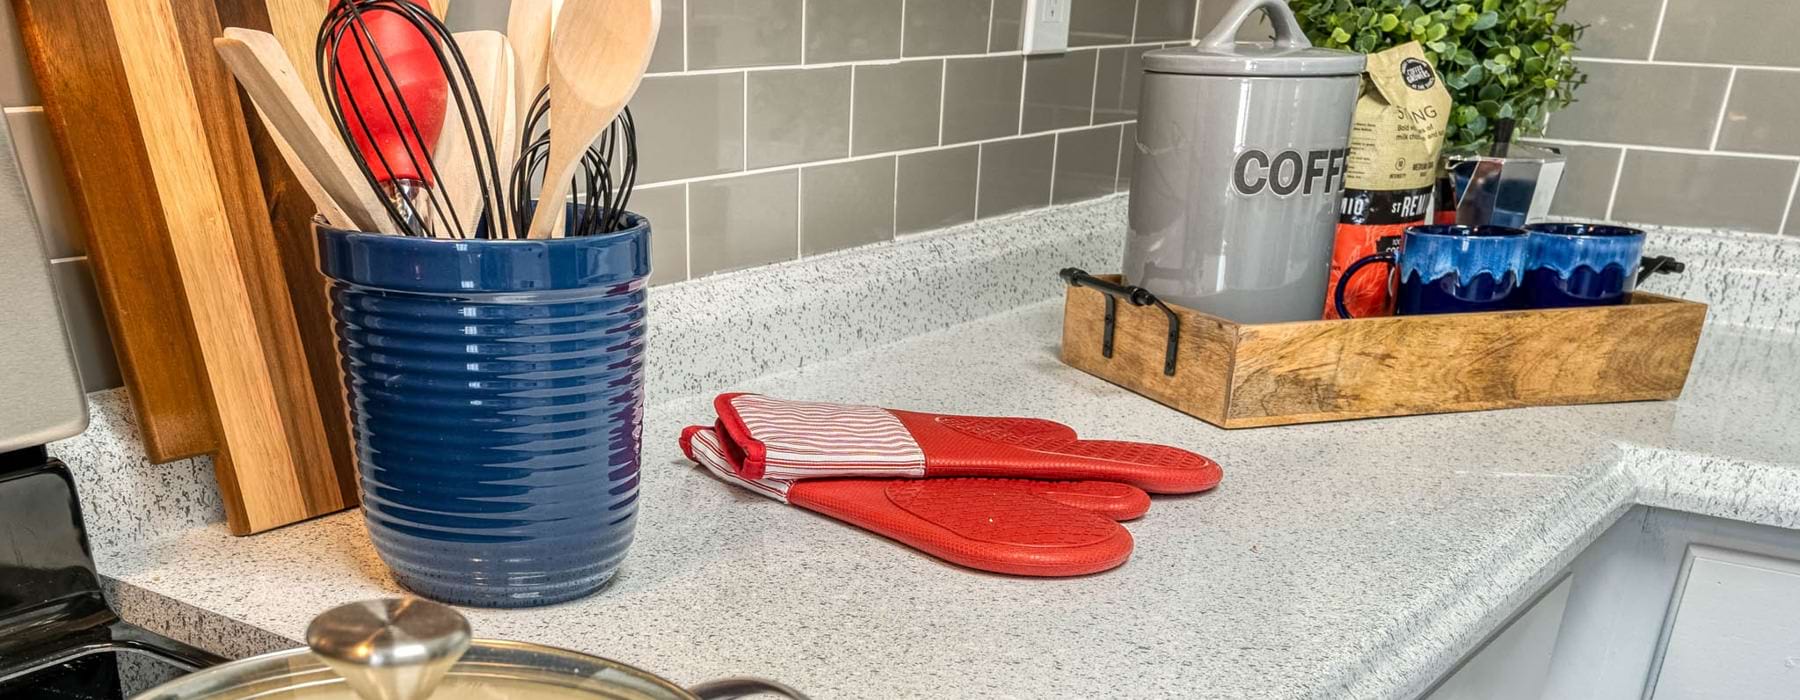 Kitchen countertop with cooking utensils 